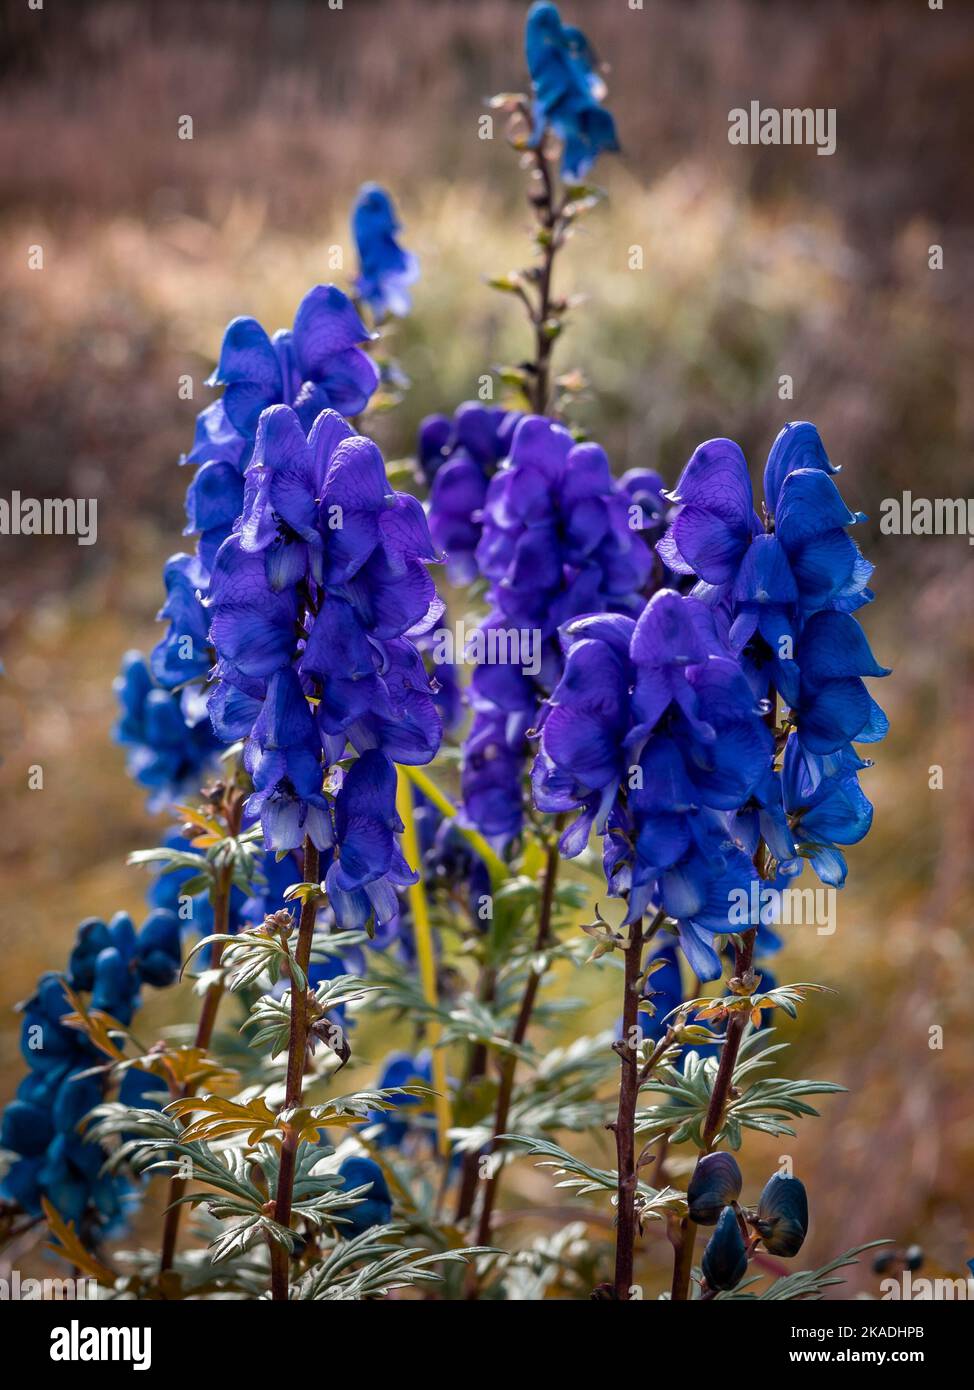 Purple flowers of monkwood (Aconitum napellus), blooming in the meadow. Stock Photo